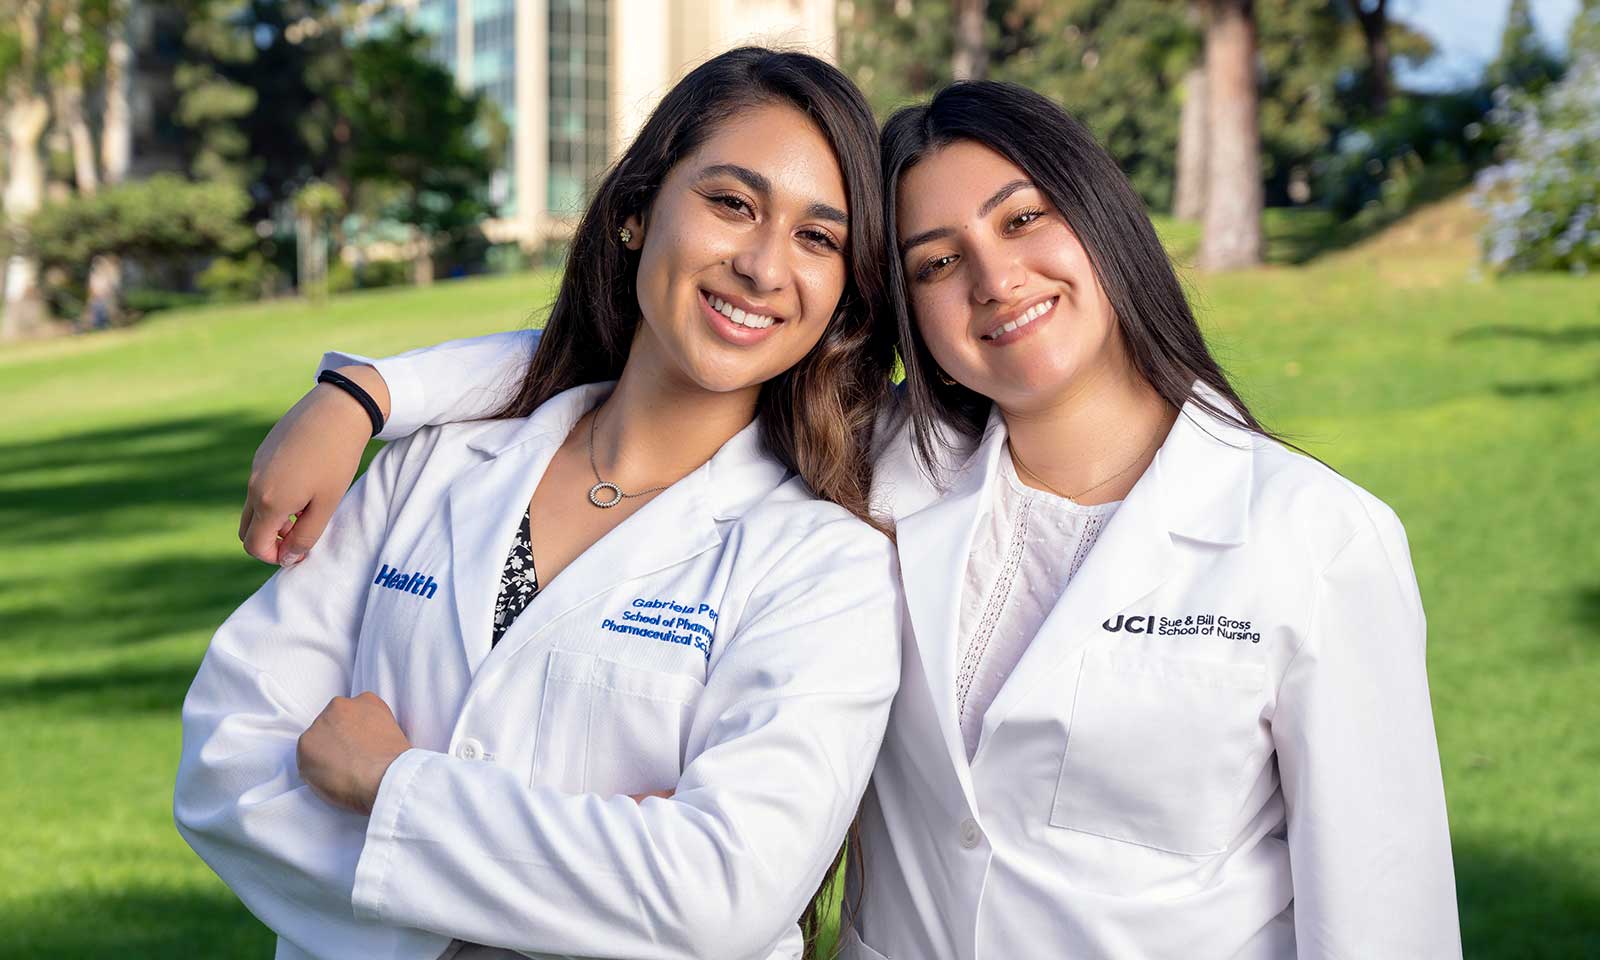 SISTERS PURSUE THEIR DREAMS AT UCI